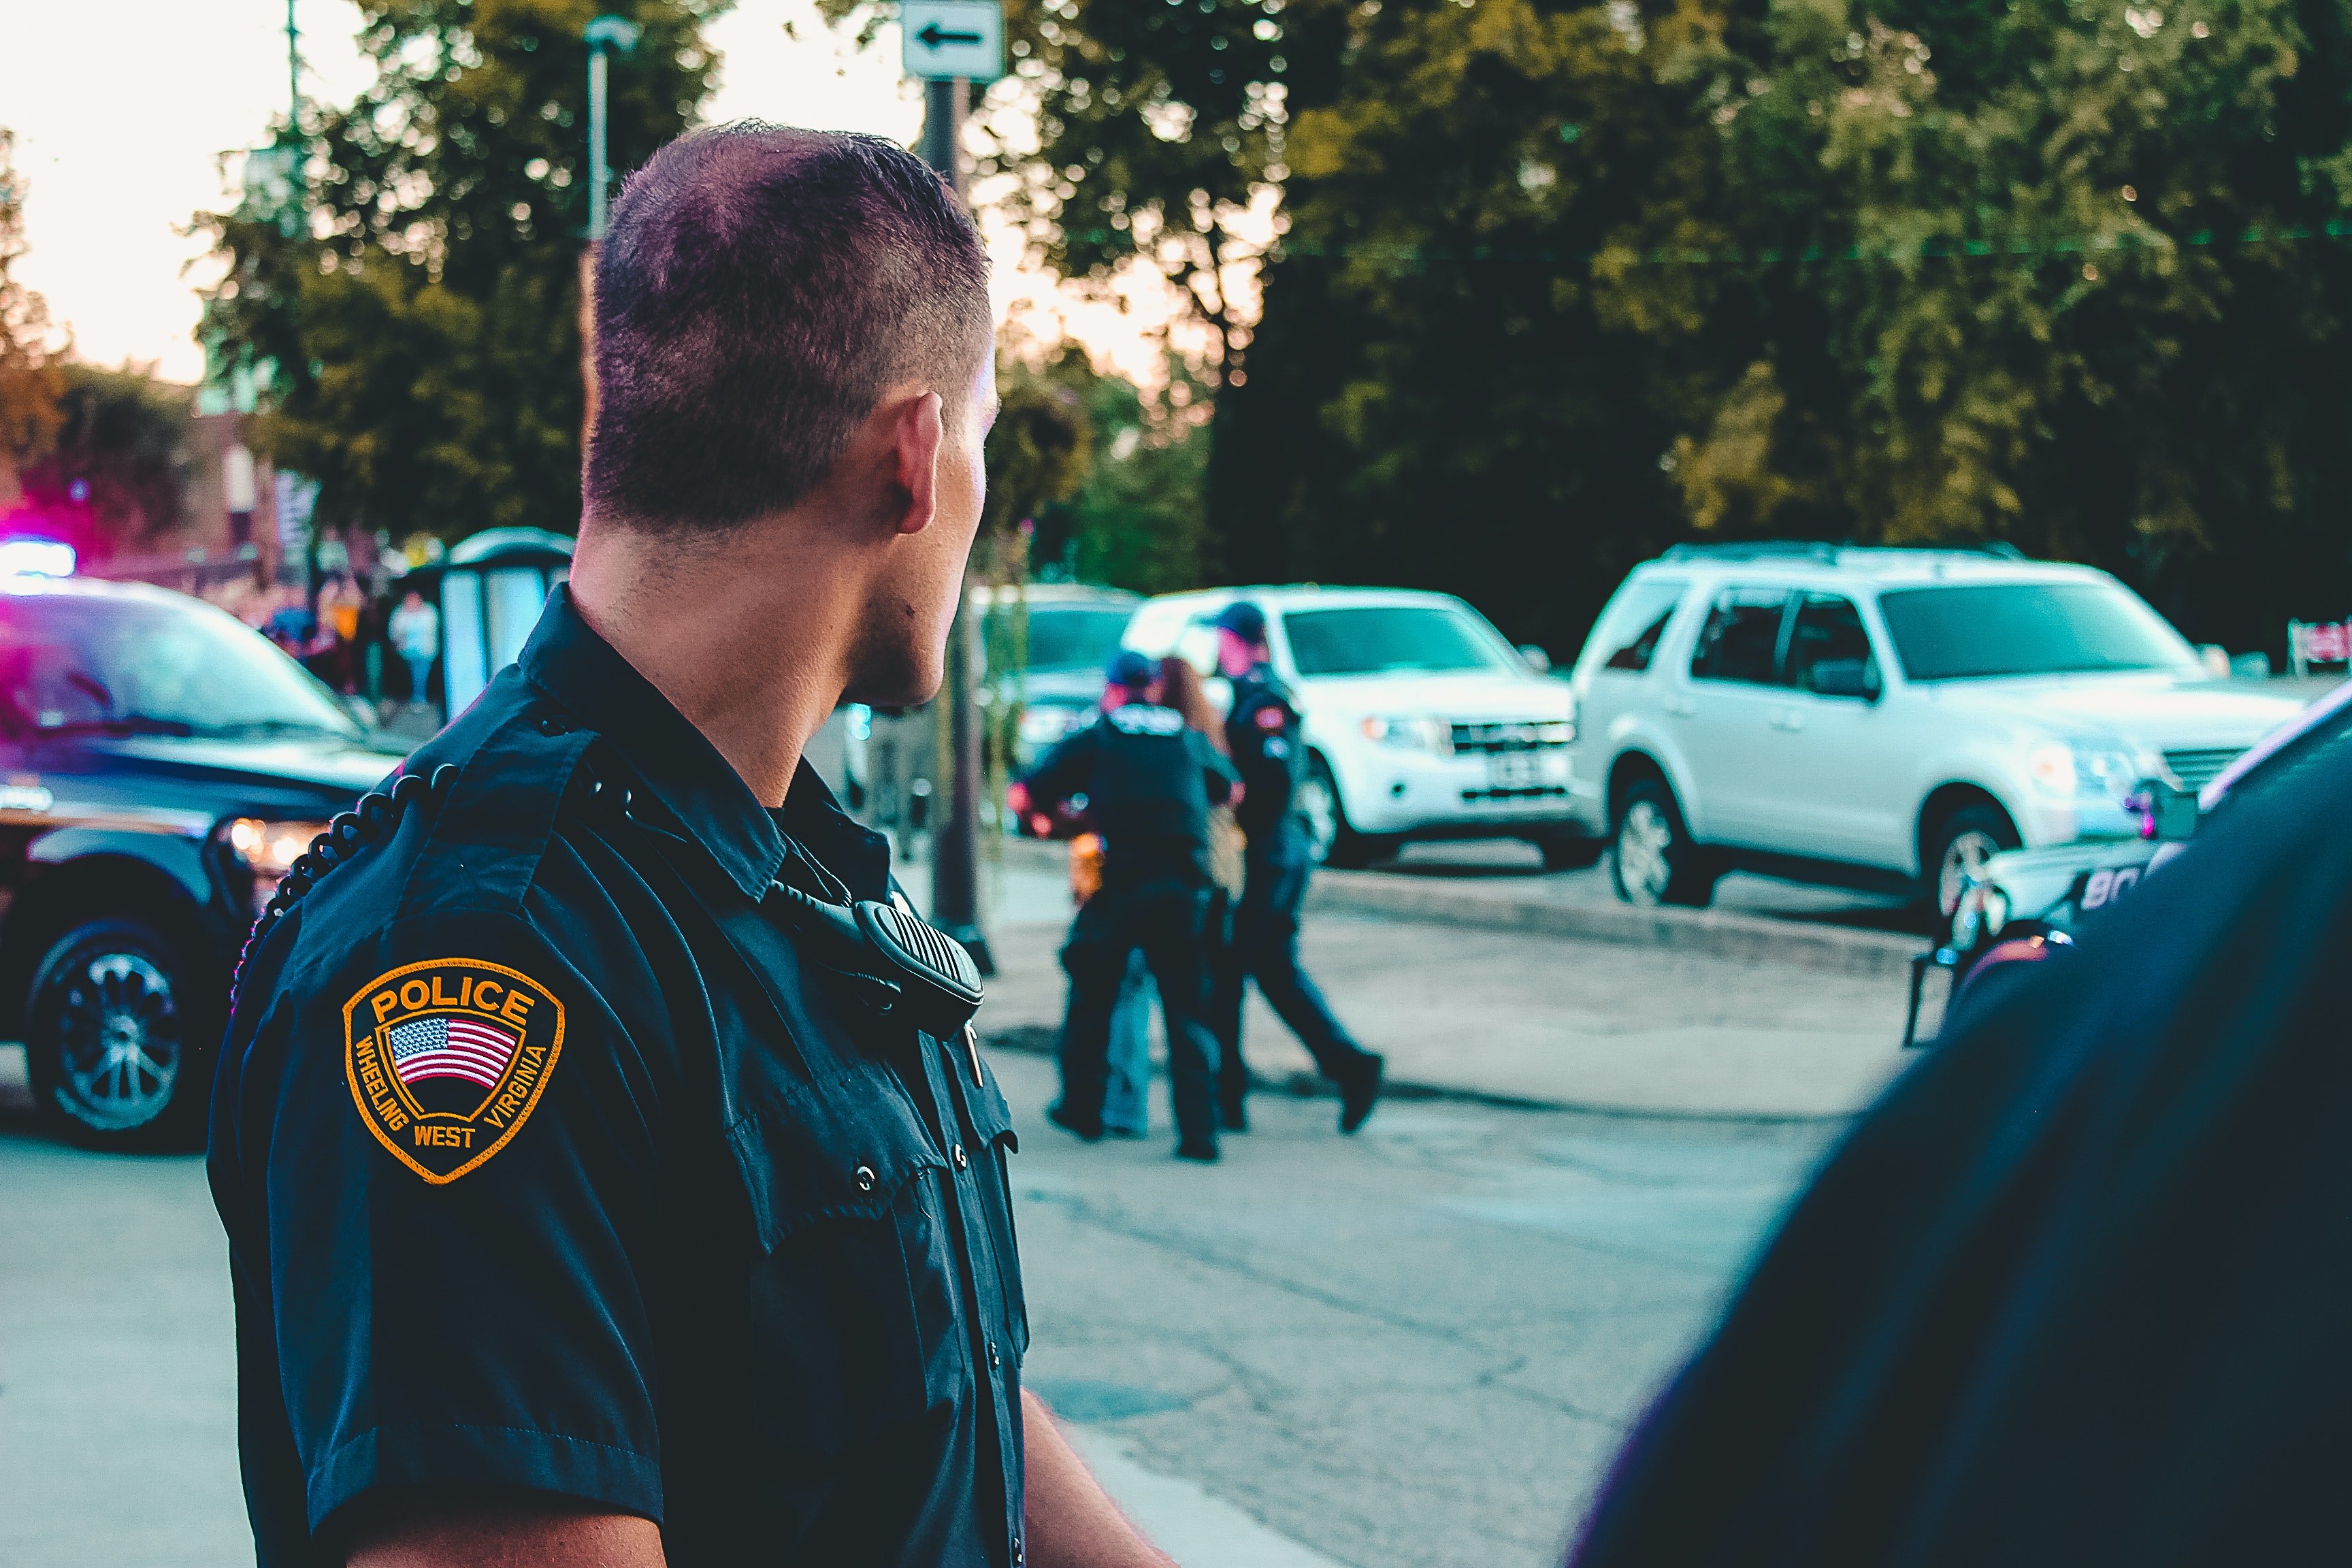 Police officer looking back toward a vehicle. | Source: Pexels/ Rosemary Ketchum